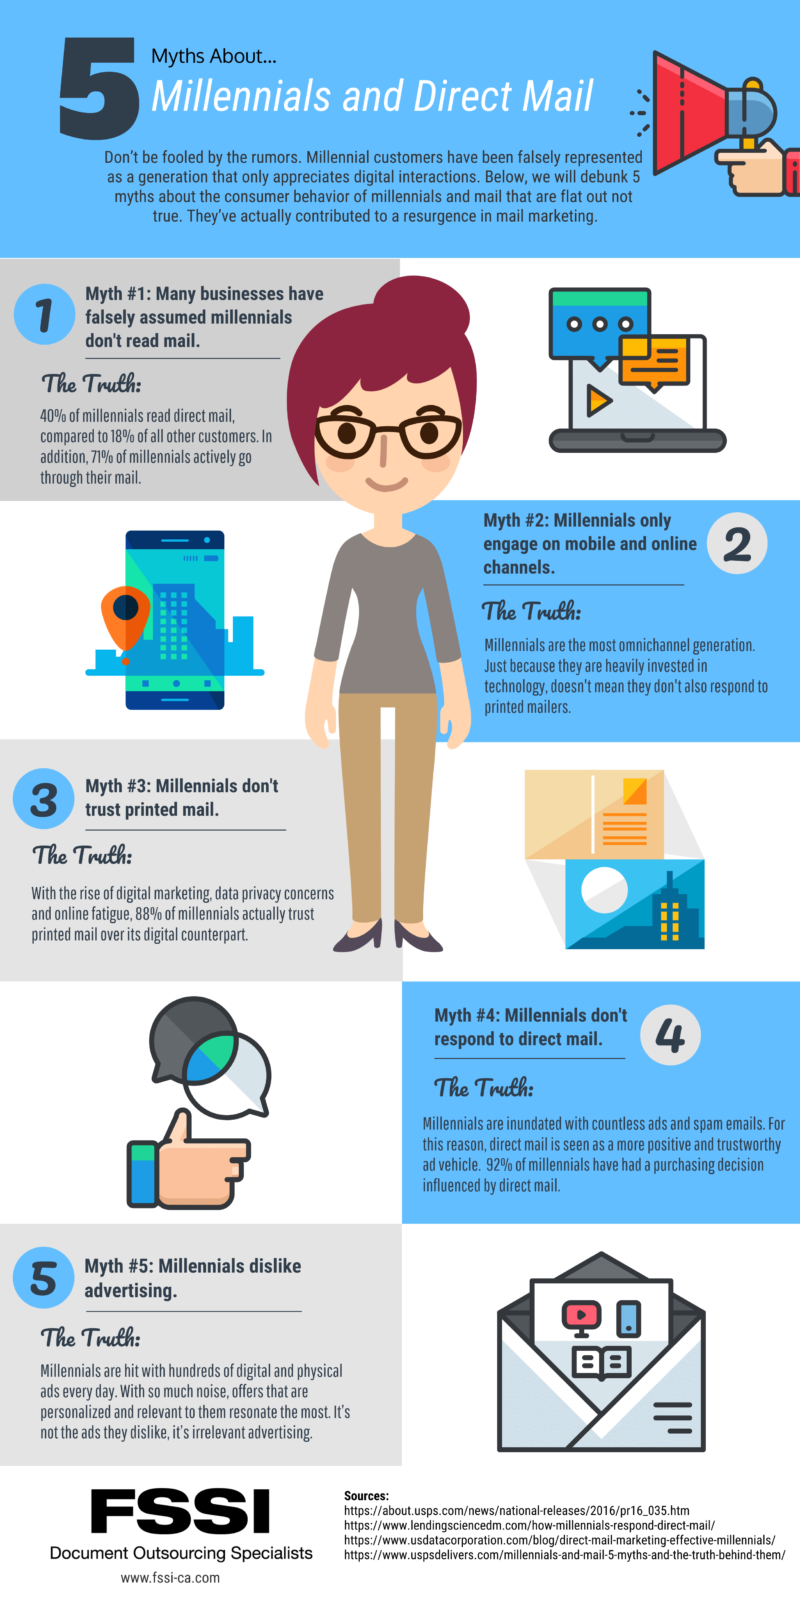 Myths About Millennials and Direct Mail Infographic